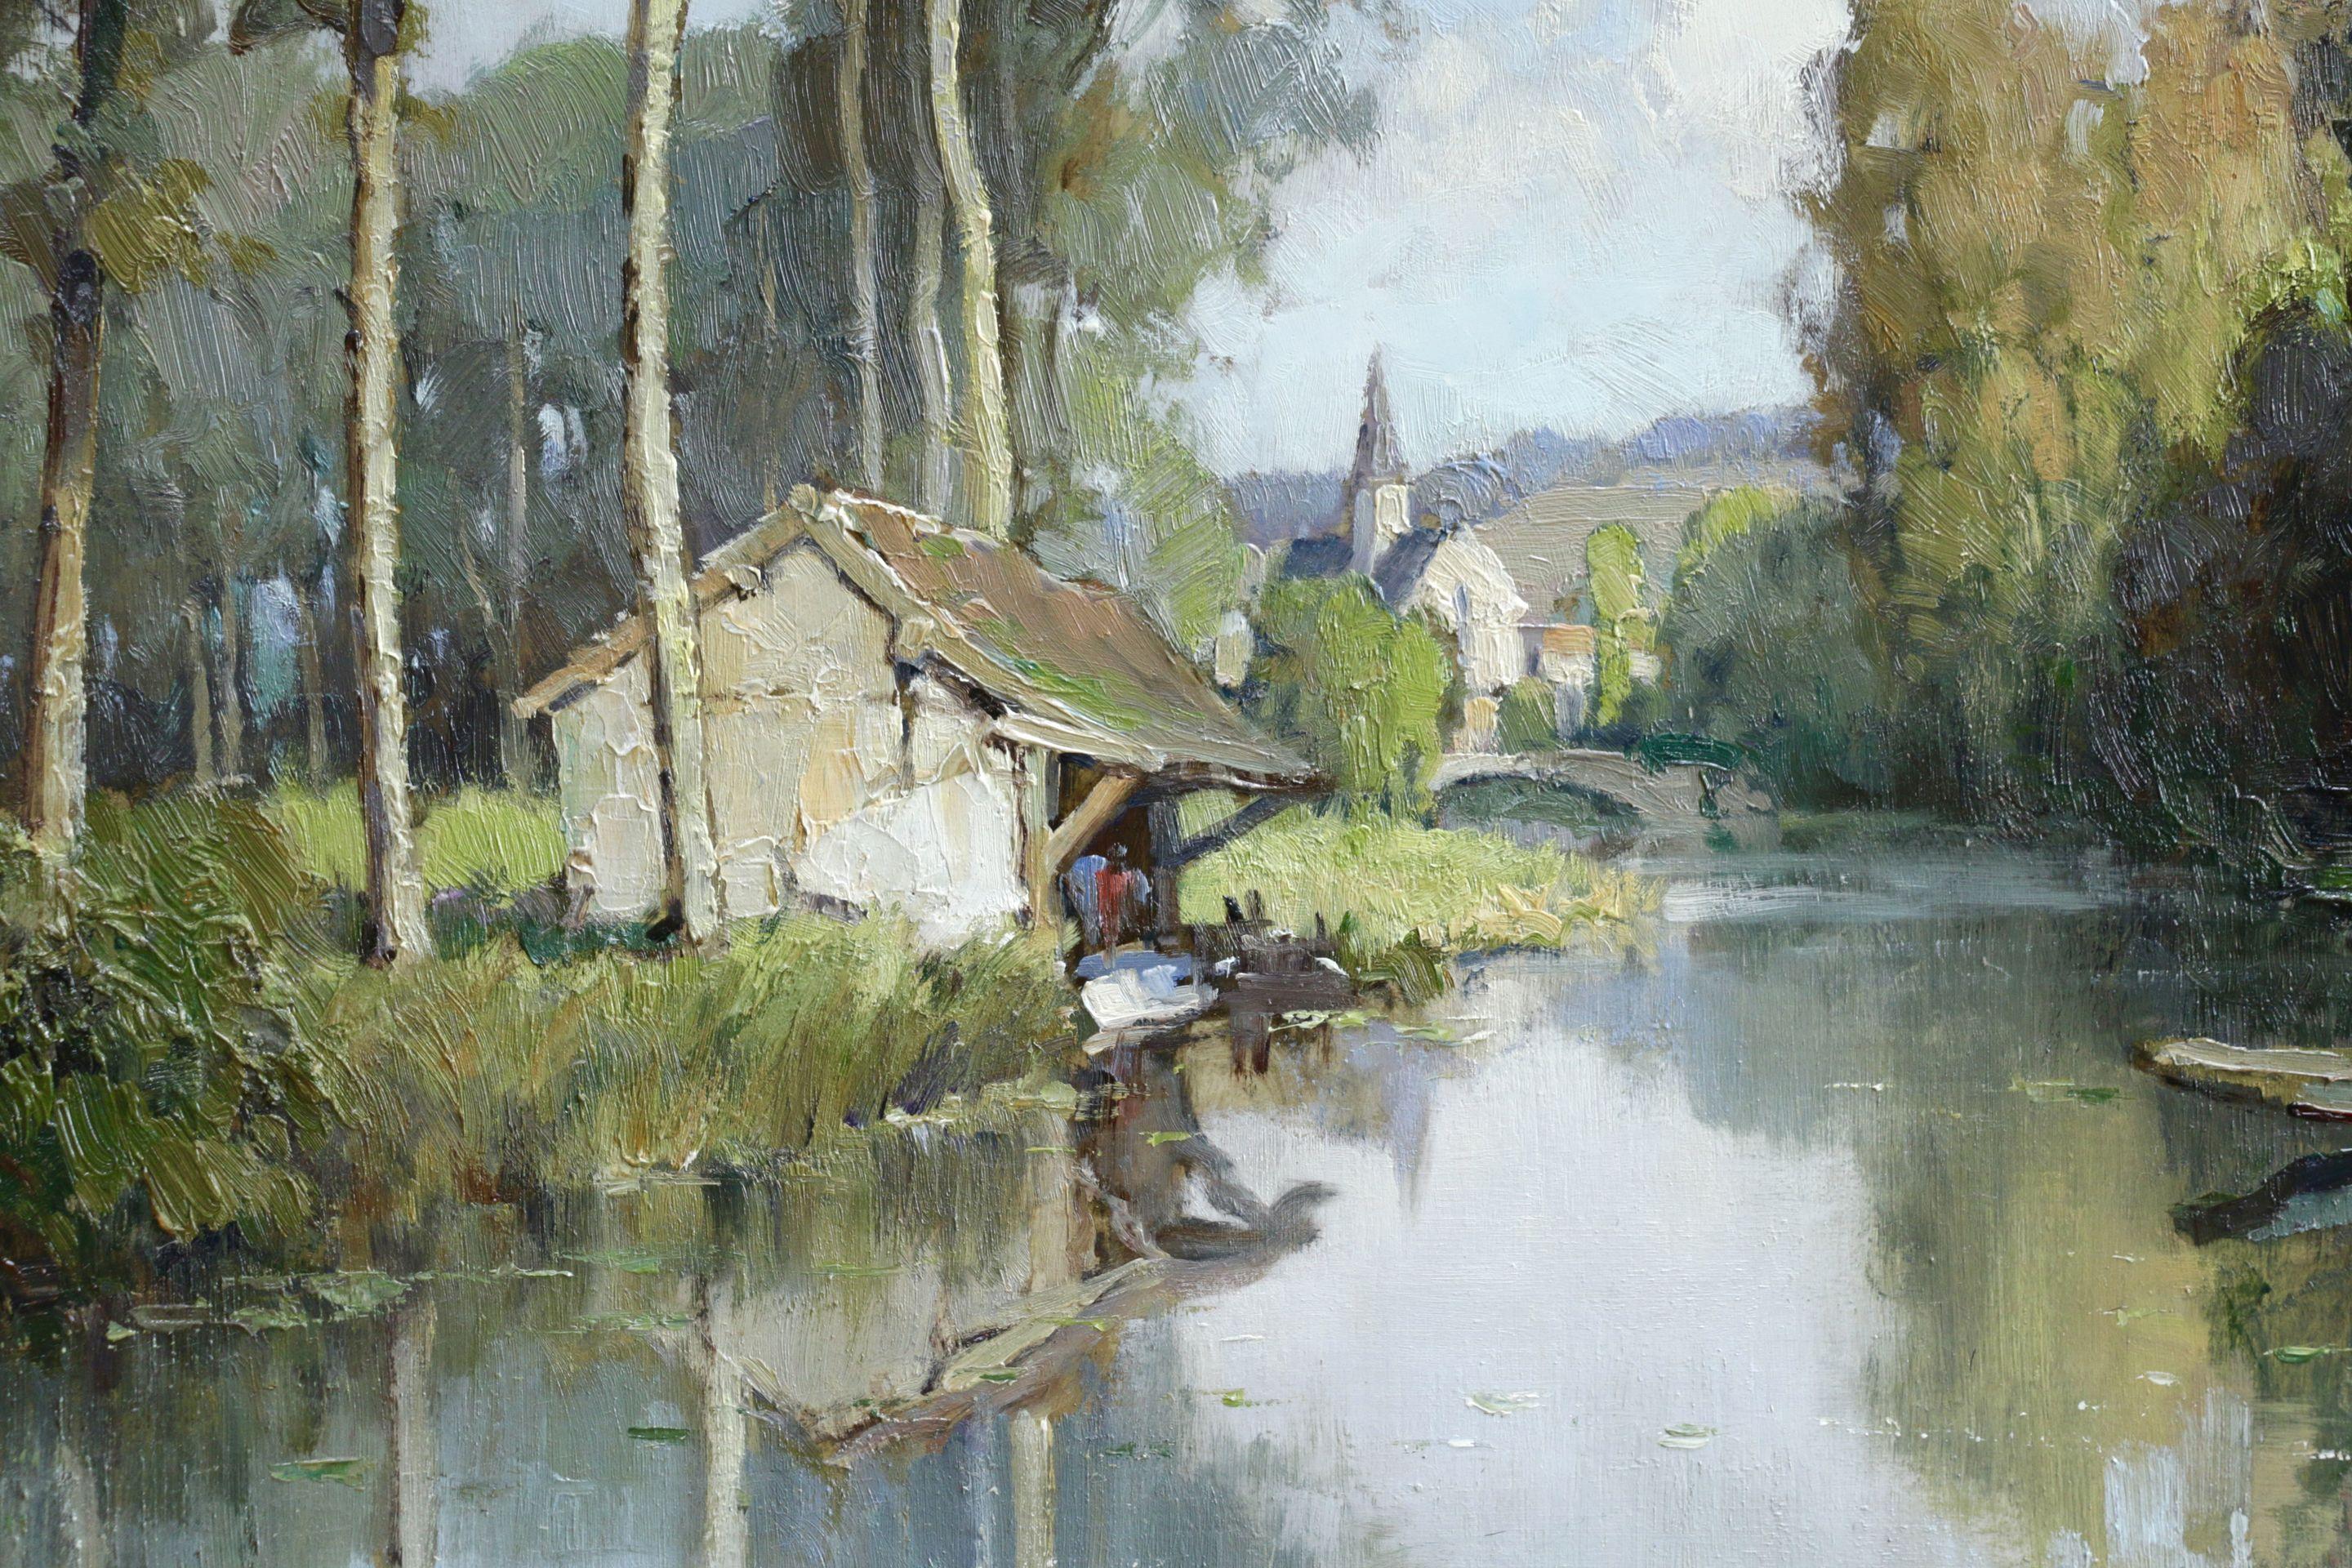 Lavoir sur L'Eure- 20th Century Oil, River & Trees in Landscape by Georges Robin - Post-Impressionist Painting by Georges Charles Robin